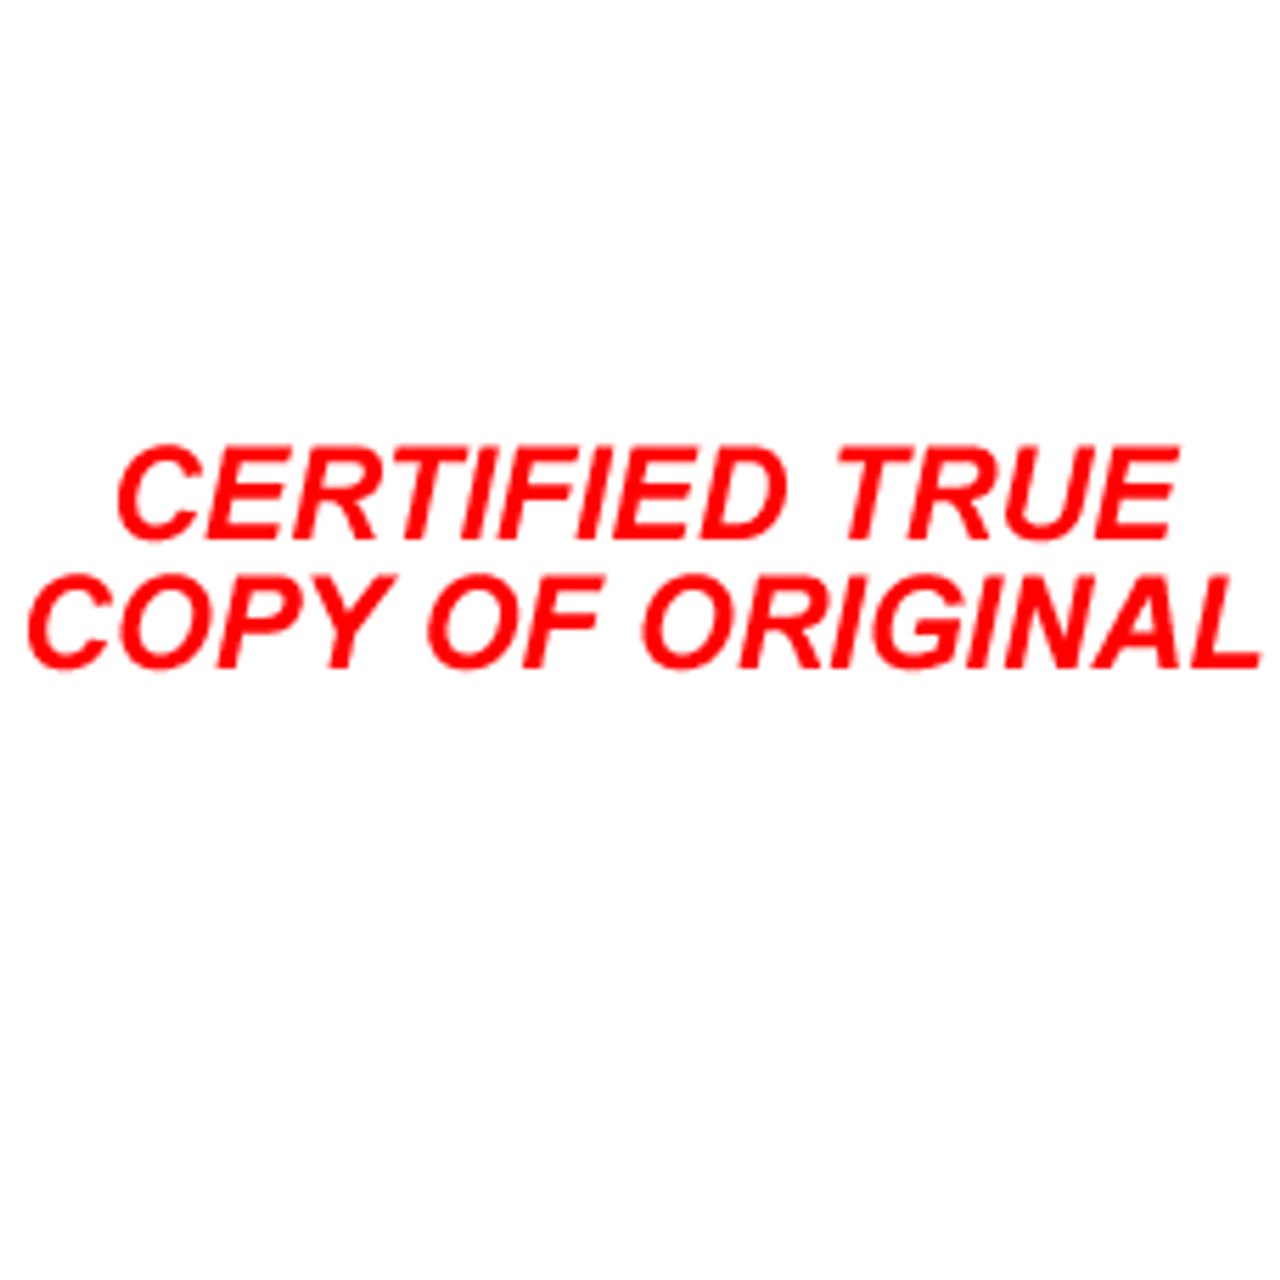 CERTIFIED TRUE COPY OF ORIGINAL Rubber stamp for office use self-inking